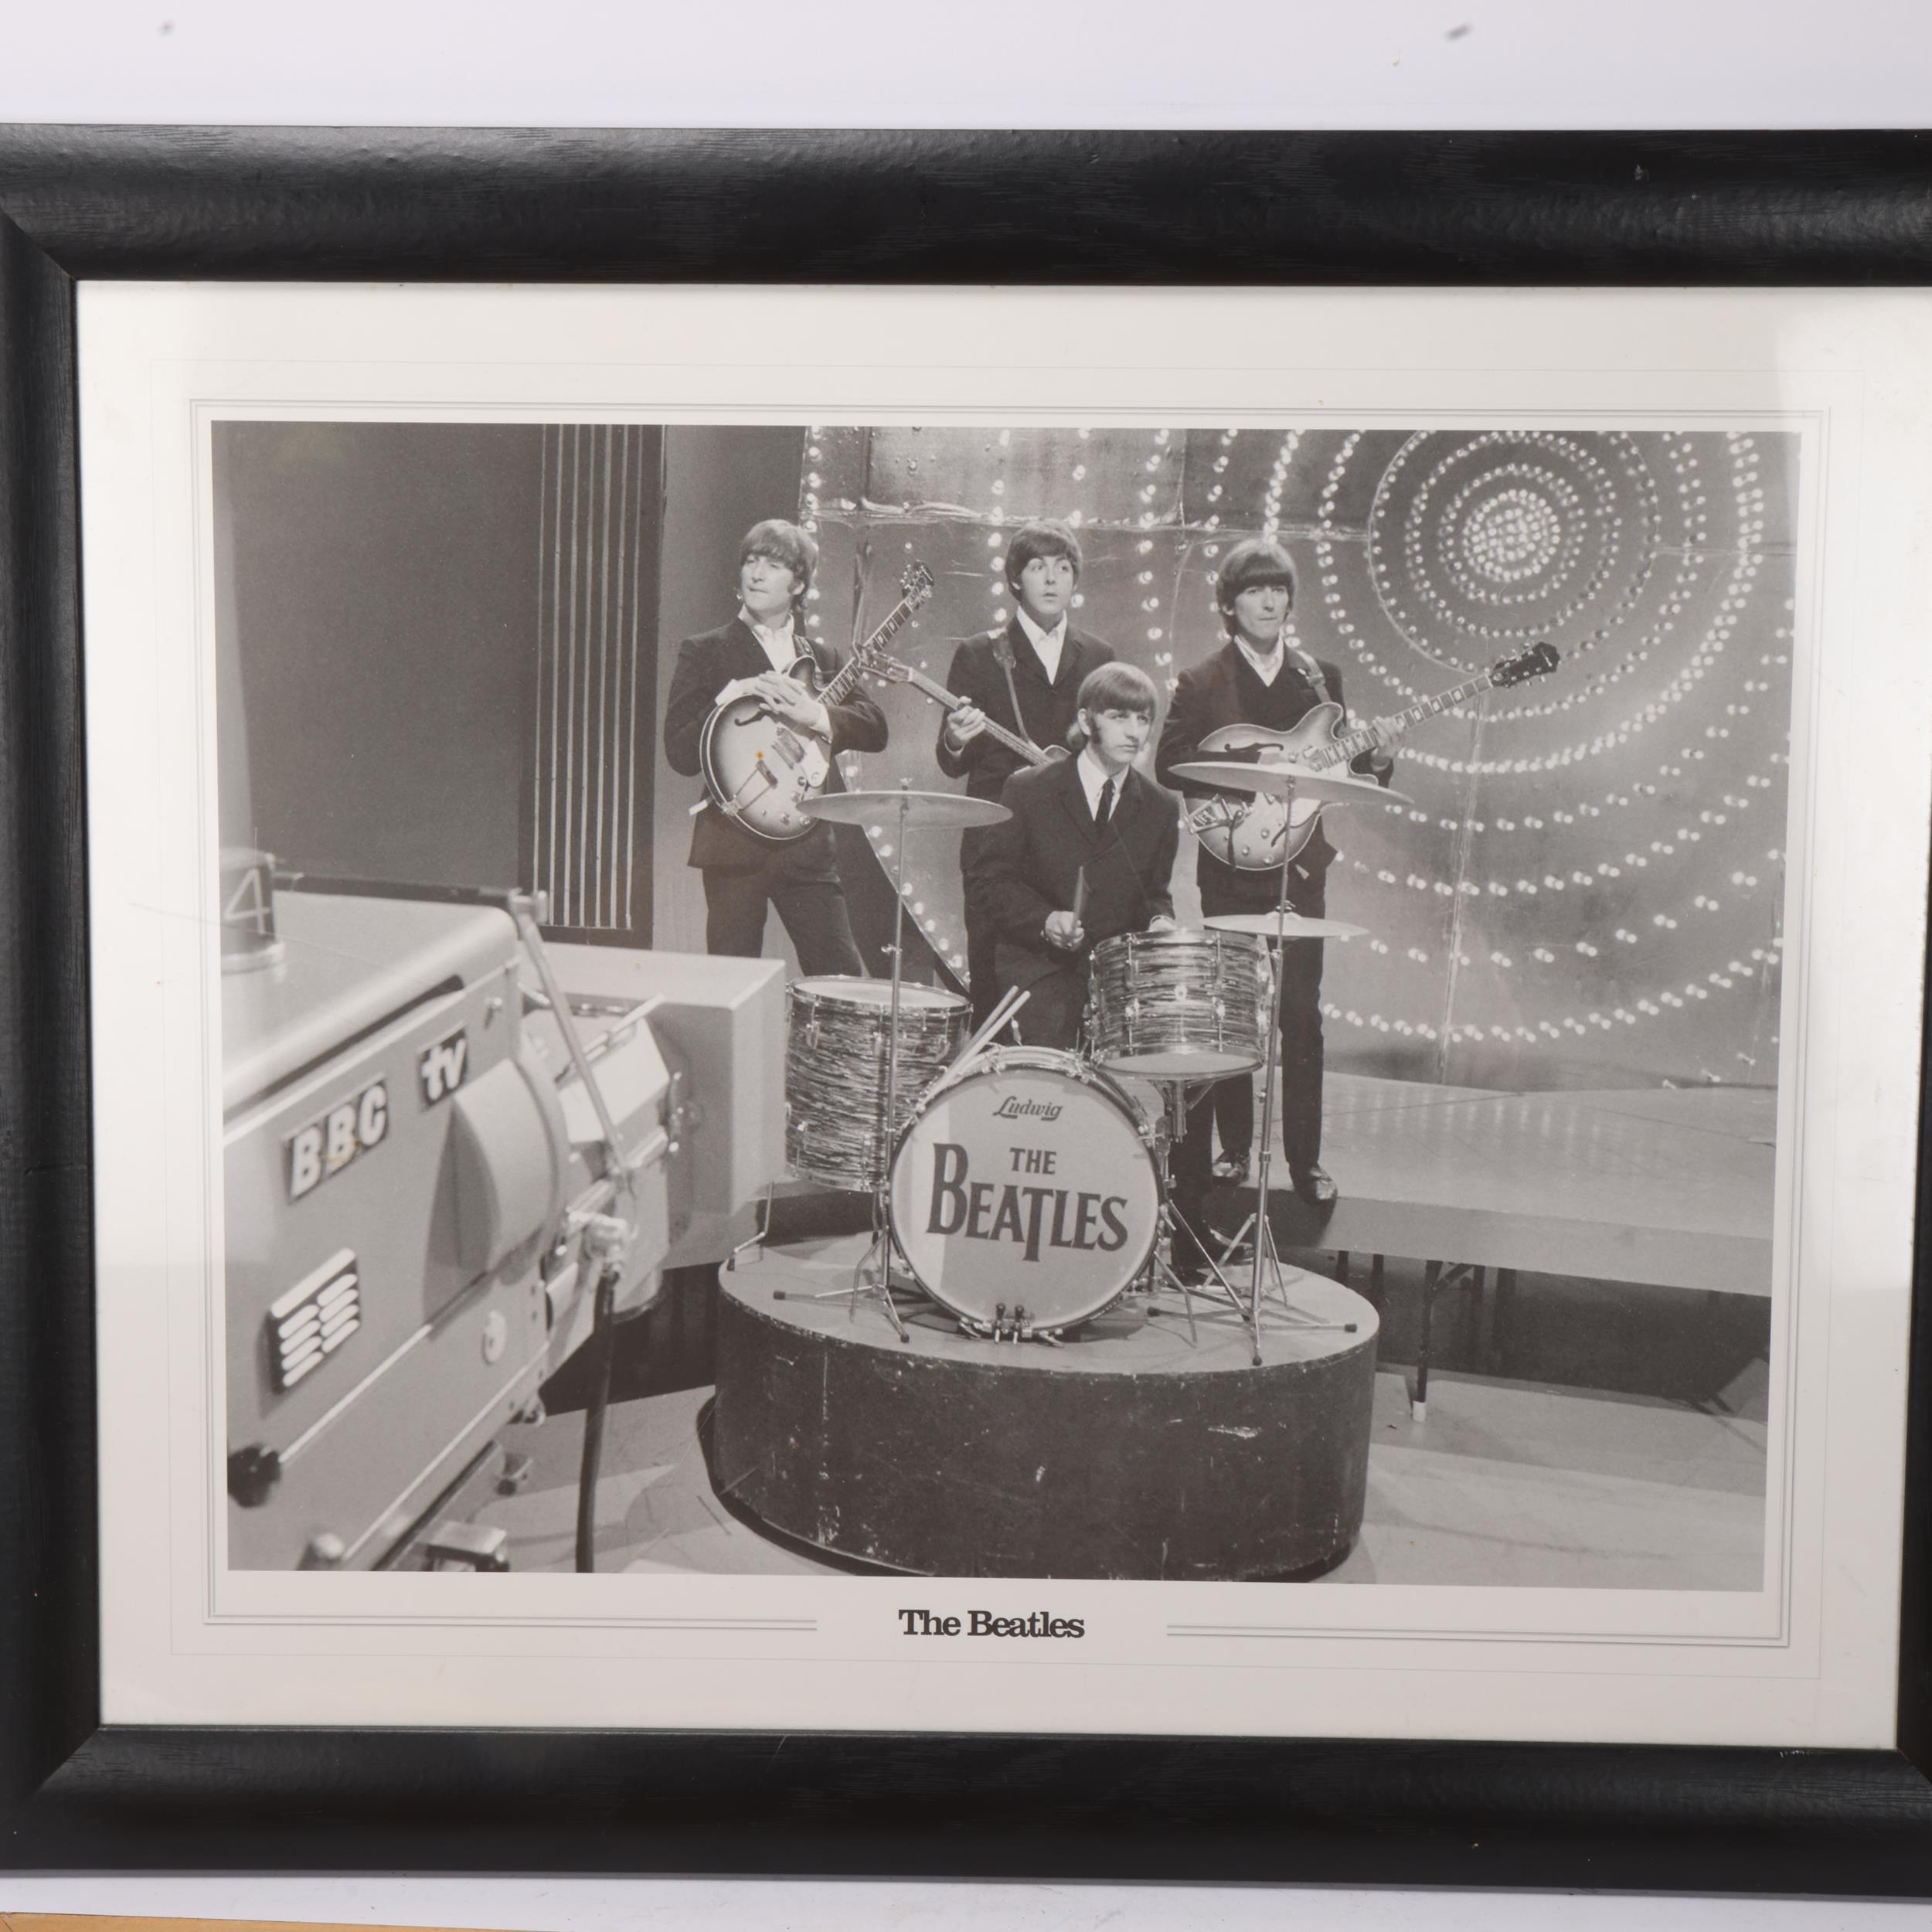 2 photographic prints of The Beatles, largest image 42 x 32cm, both framed Good condition